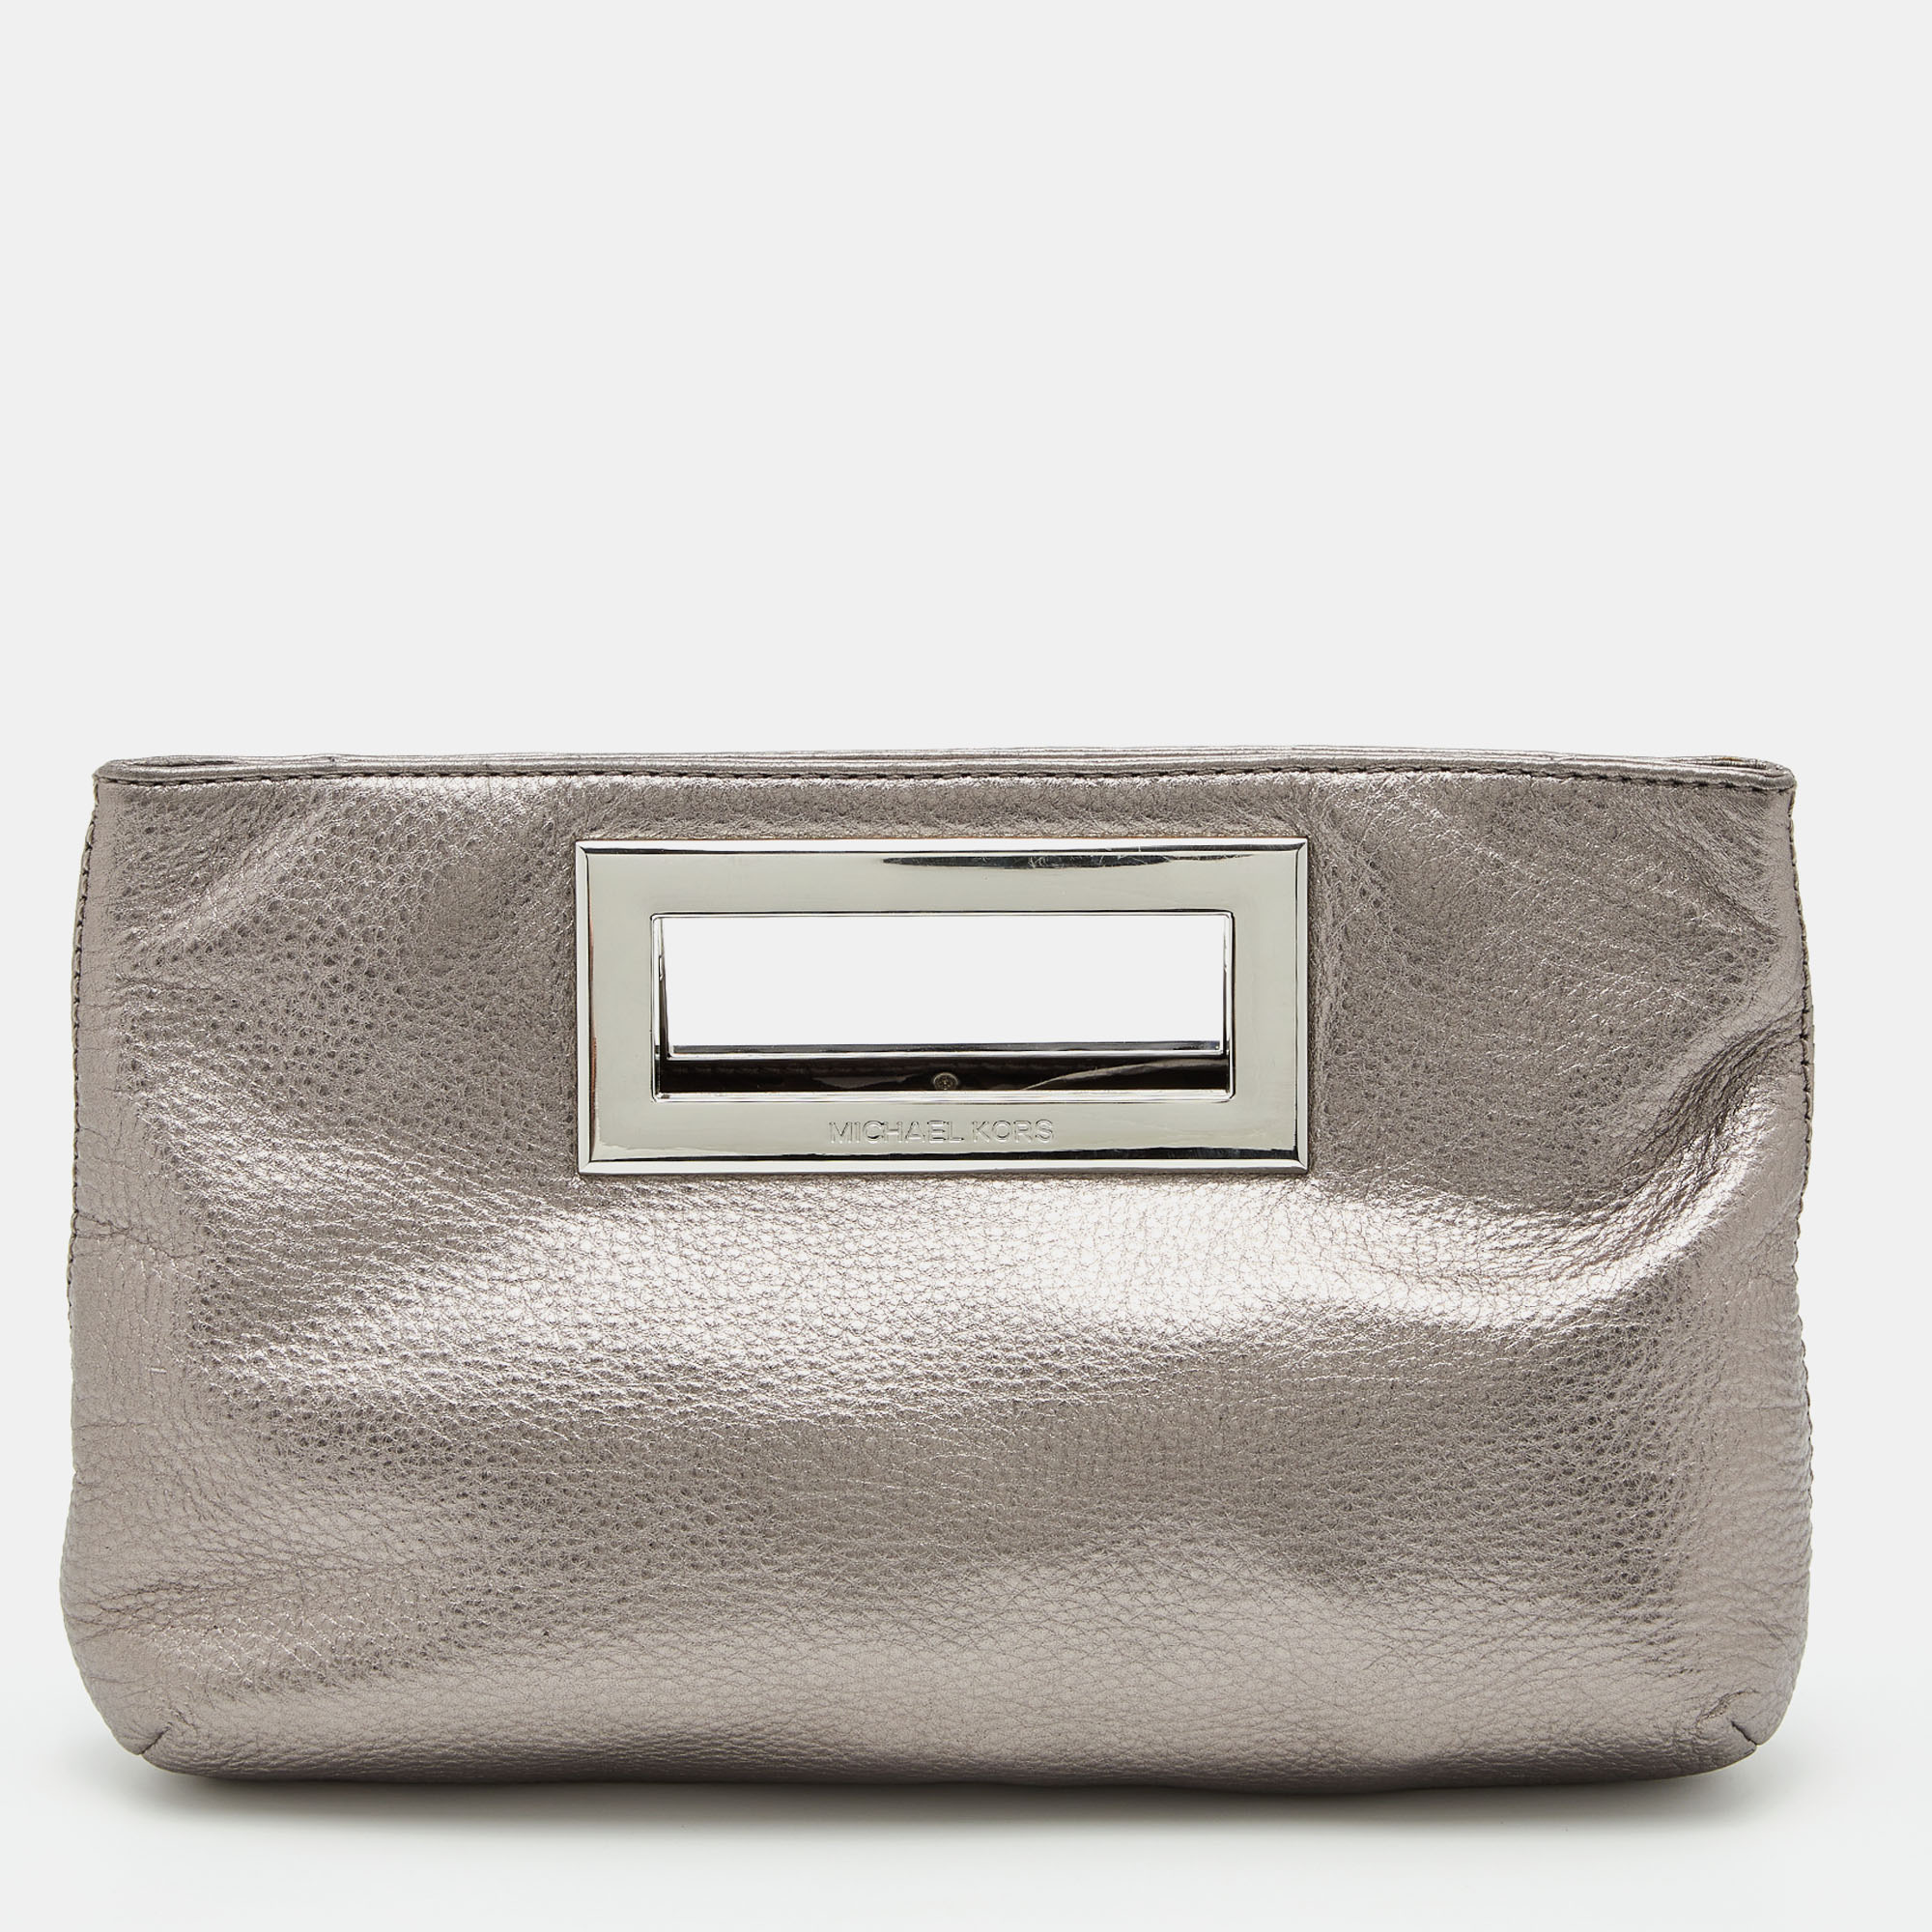 Pre-owned Michael Michael Kors Metallic Grey Leather Top Handle Frame Clutch